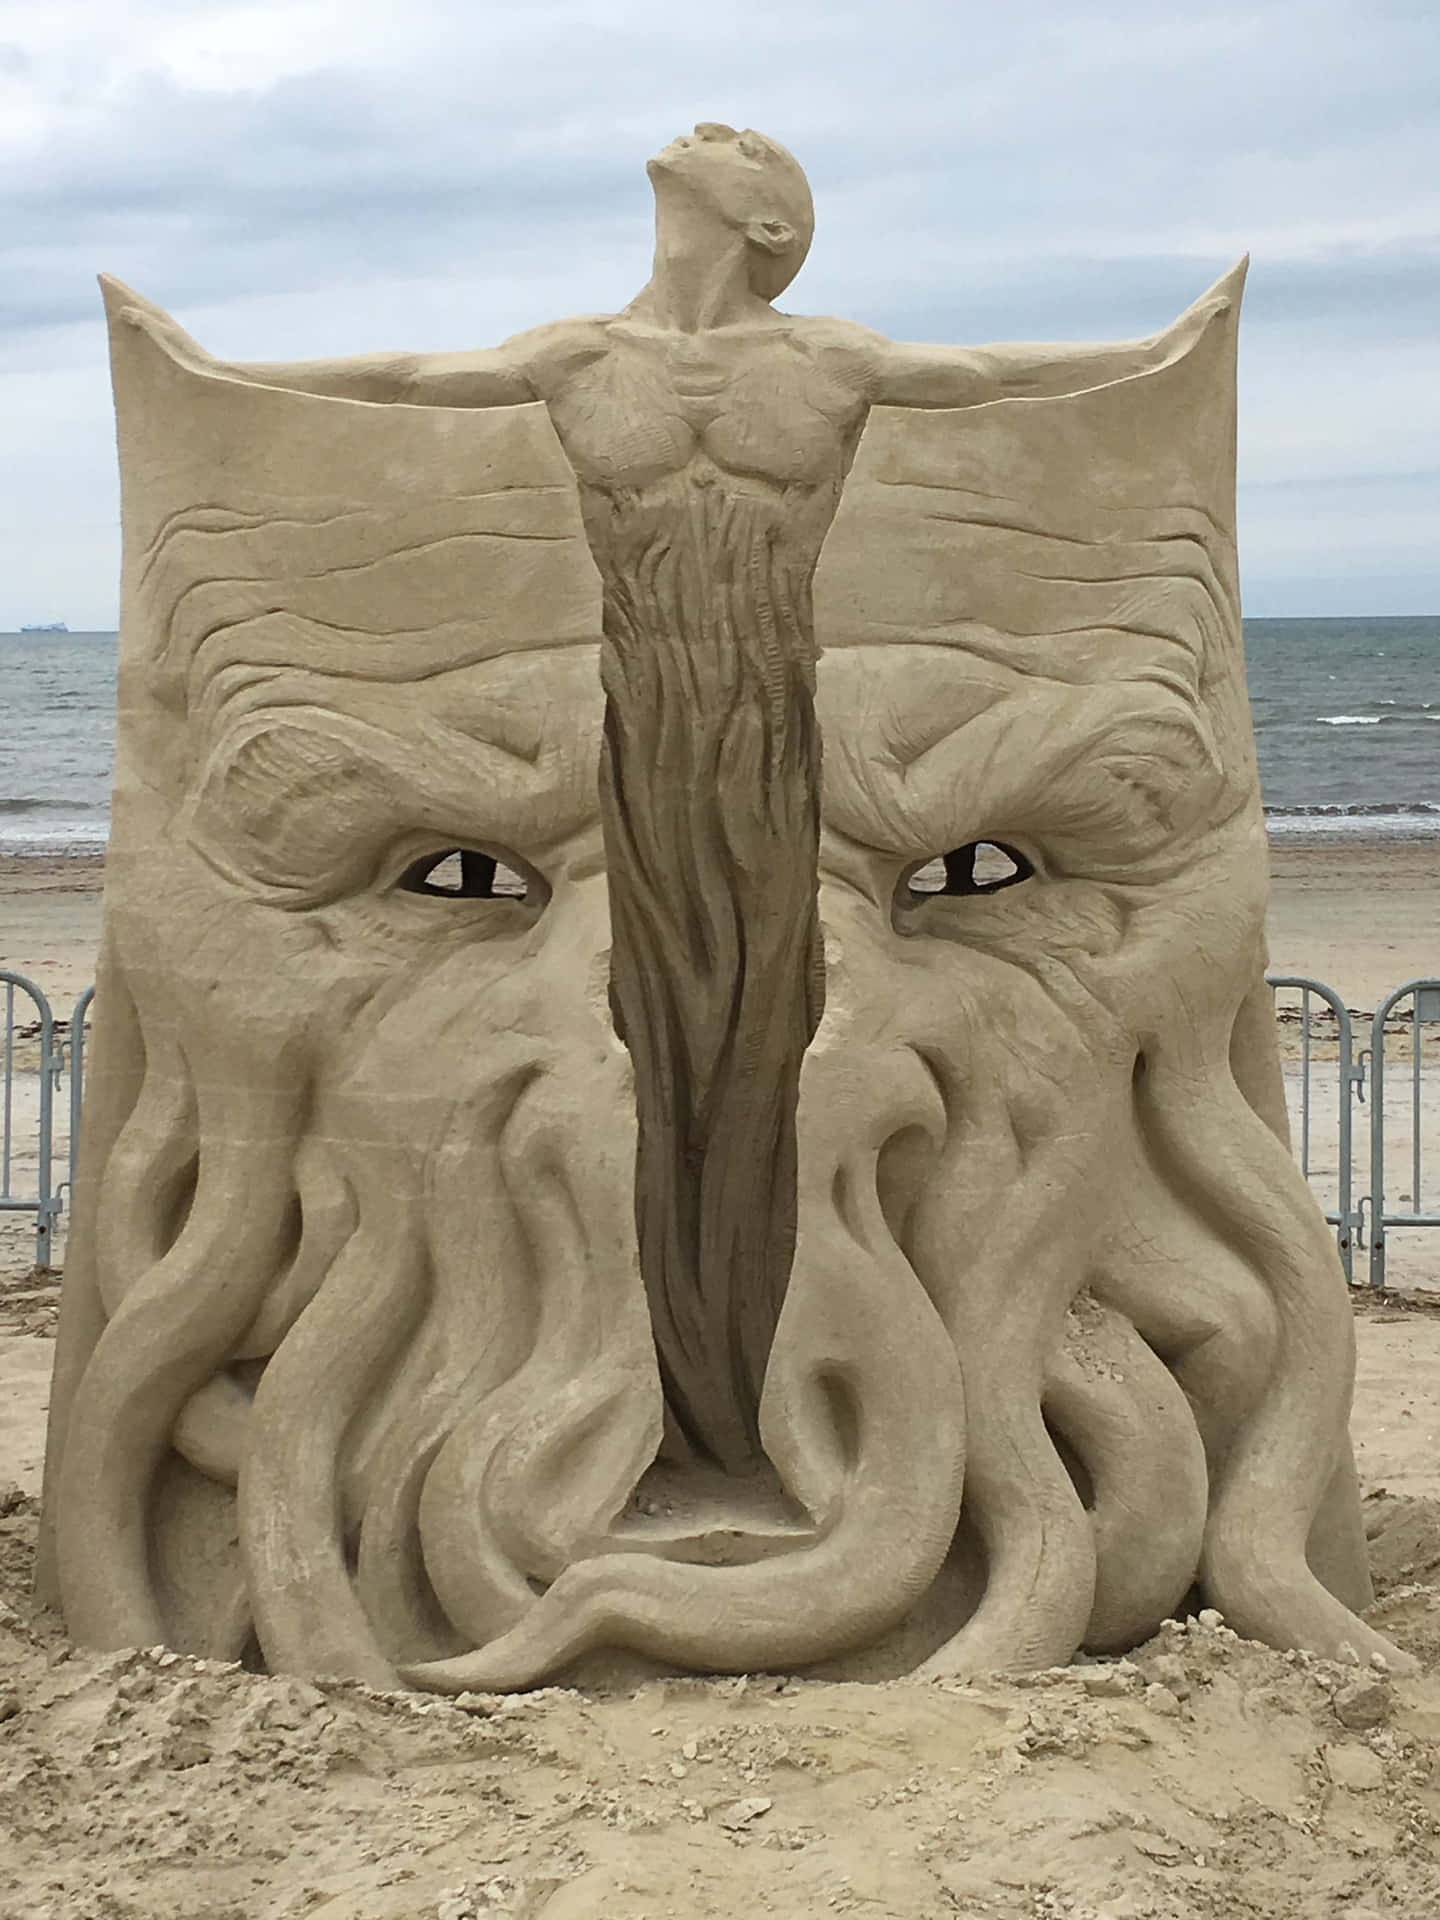 "The Beauty of Art Revealed in Immeasurable Sand"